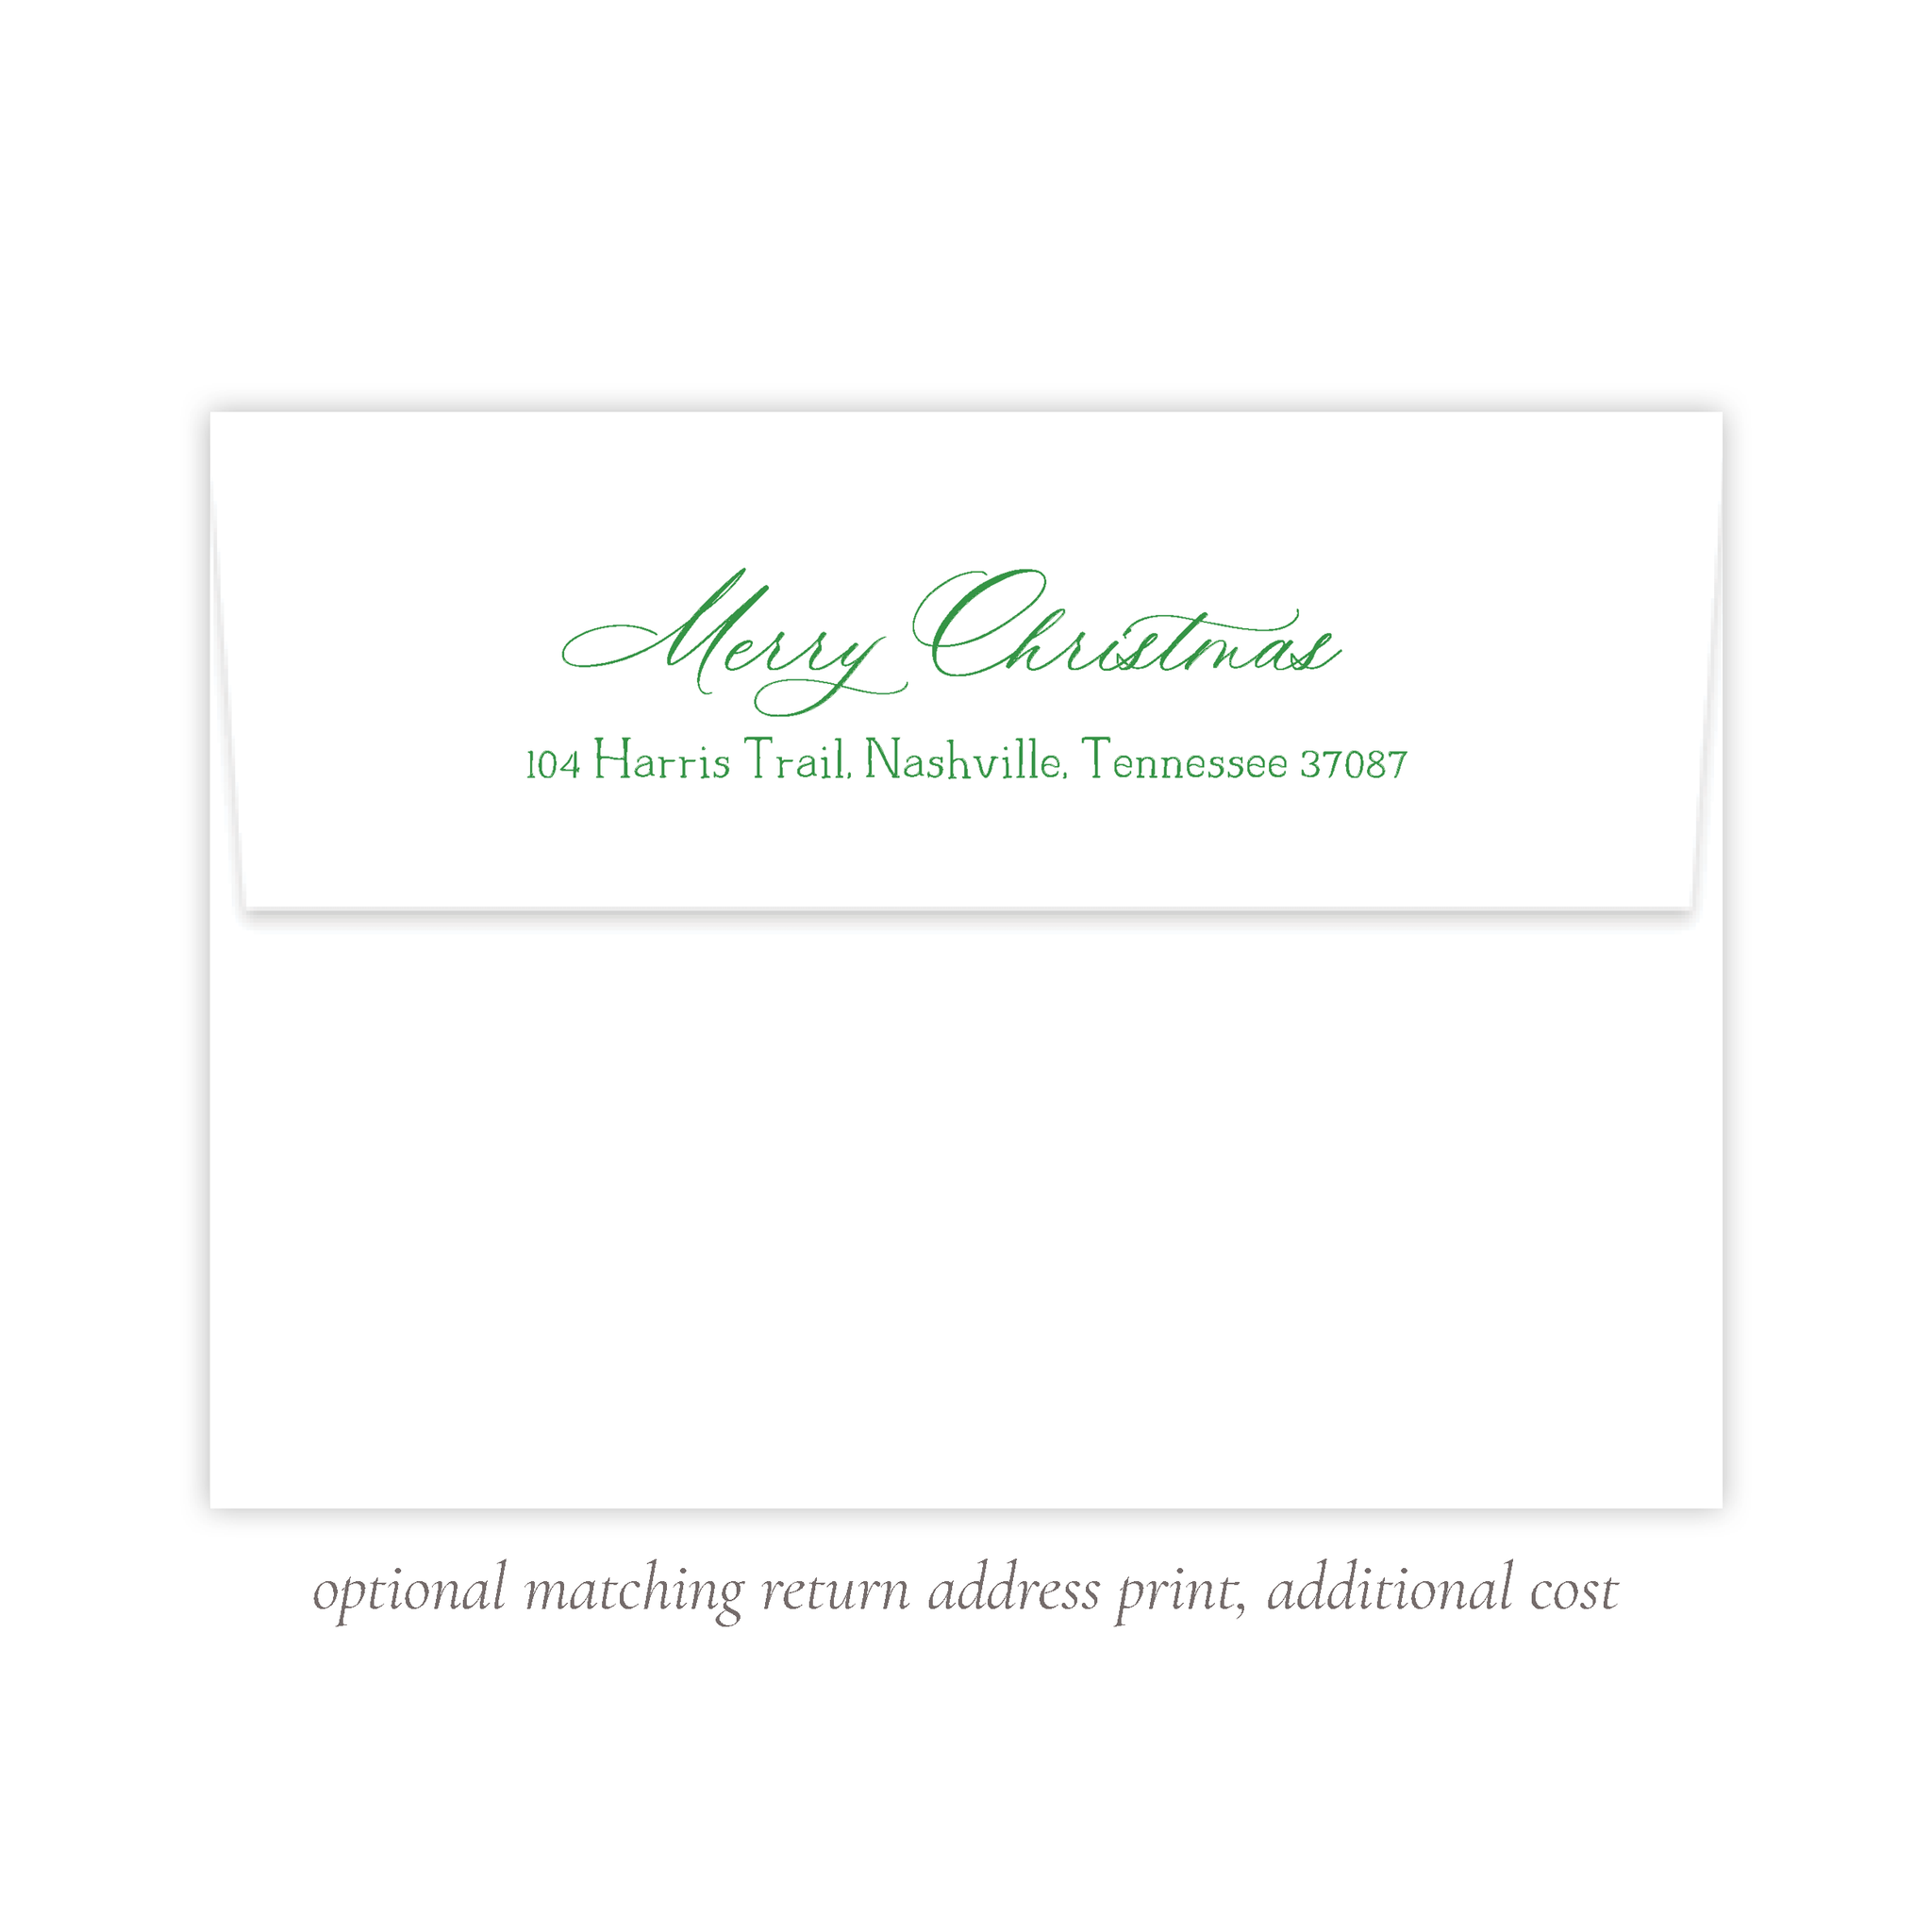 Powell Ornament Red and Green Christmas Return Address Print